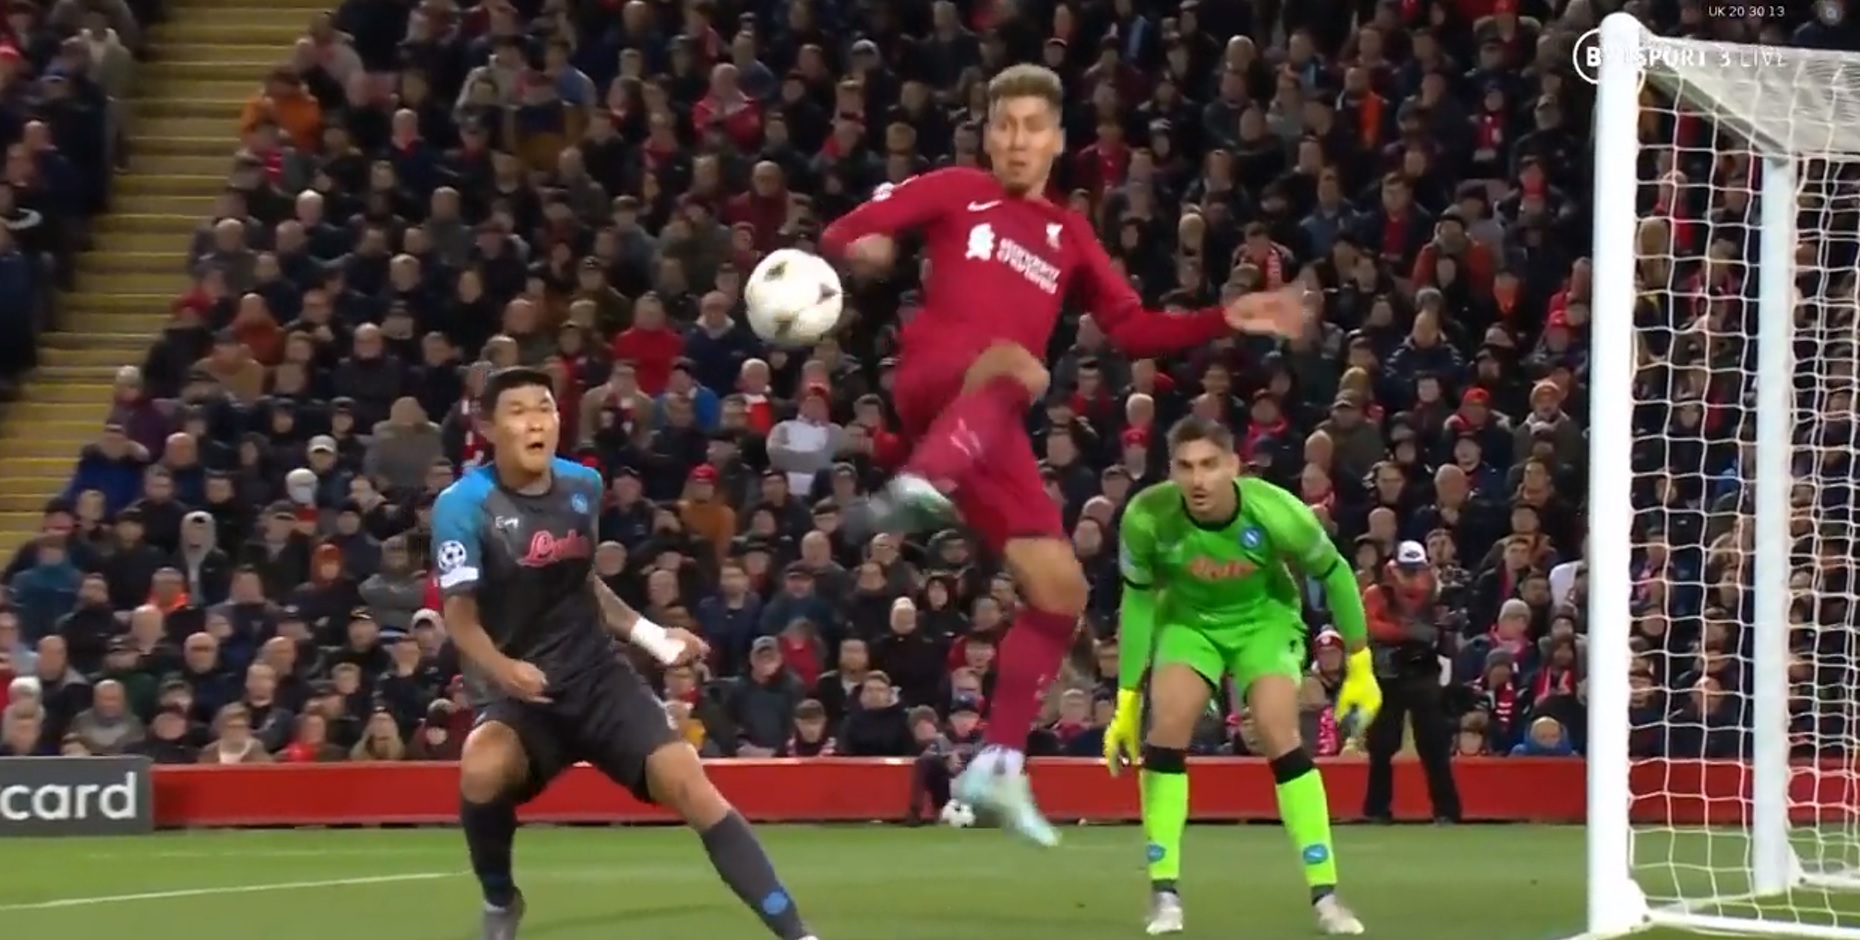 (Video) Replay of Firmino’s outrageous backheel karate kick pass that almost led to Jones goal emerges